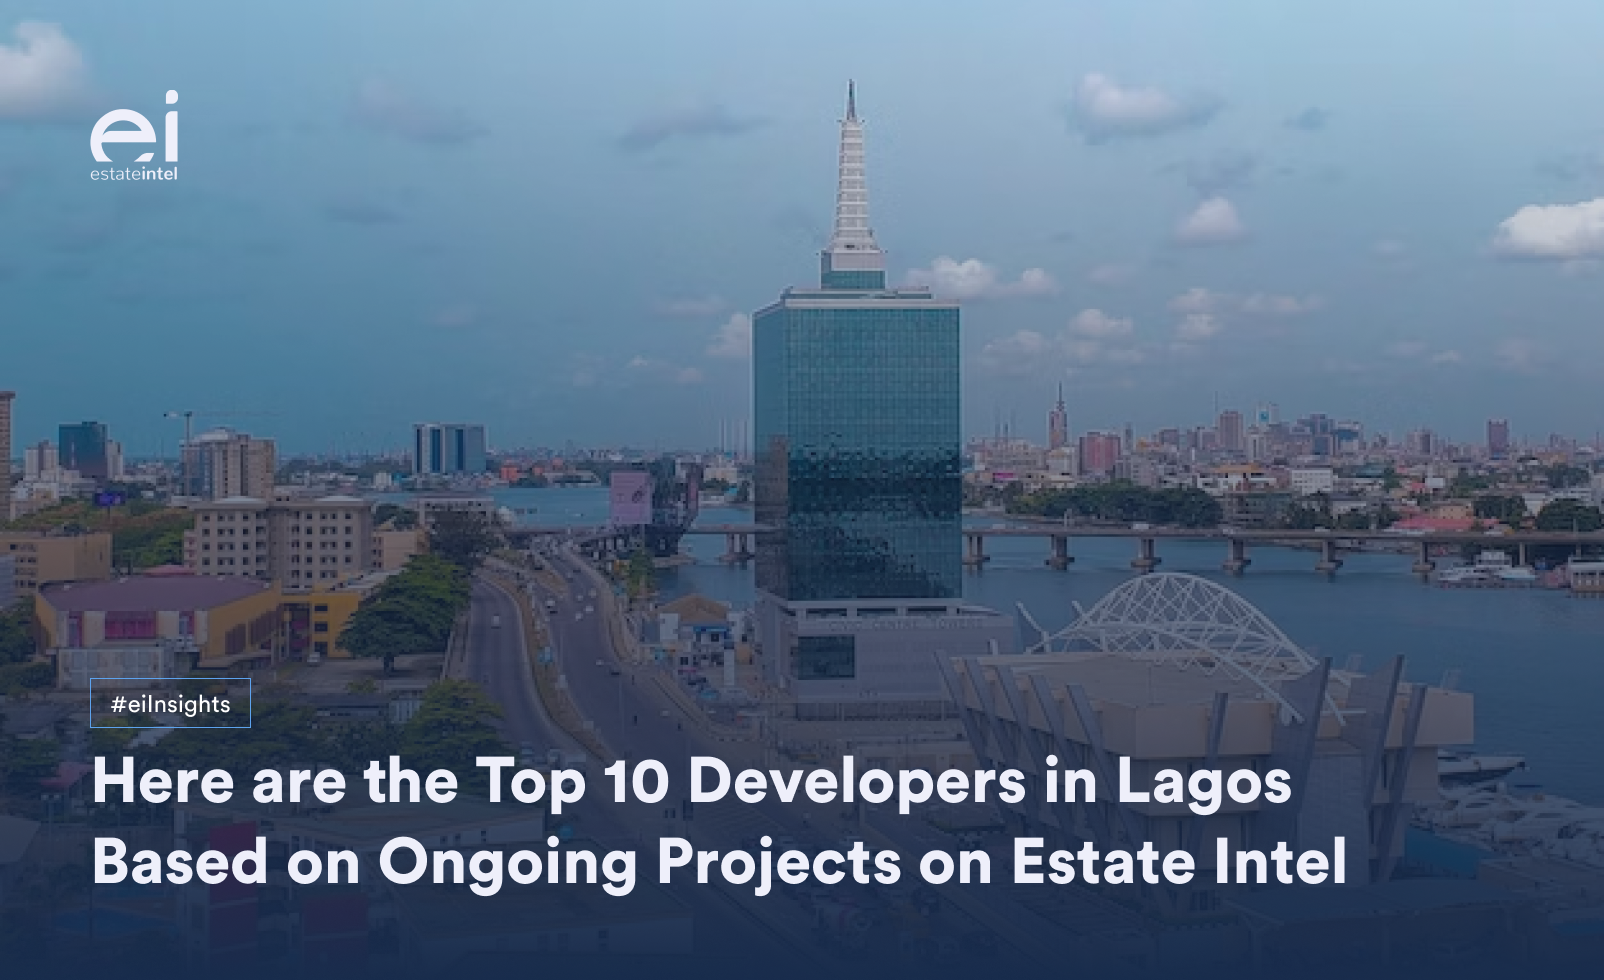 Here are the Top 10 Developers in Lagos Based on Ongoing Projects on Estate Intel